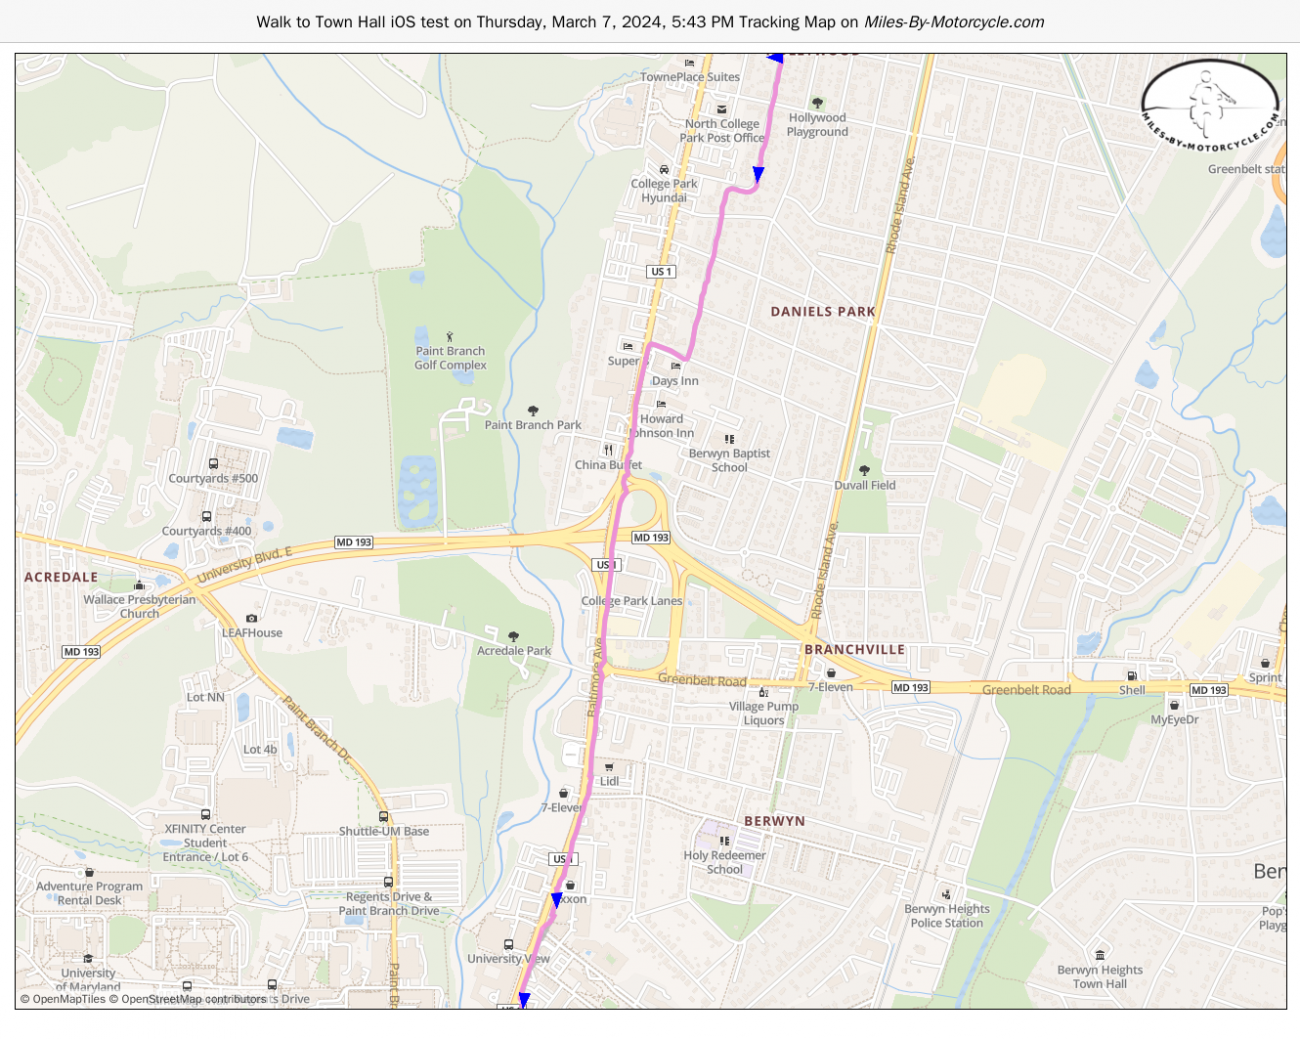 Walk to Town Hall iOS test on Thursday, March 7, 2024, 5:43 PM Tracking Map